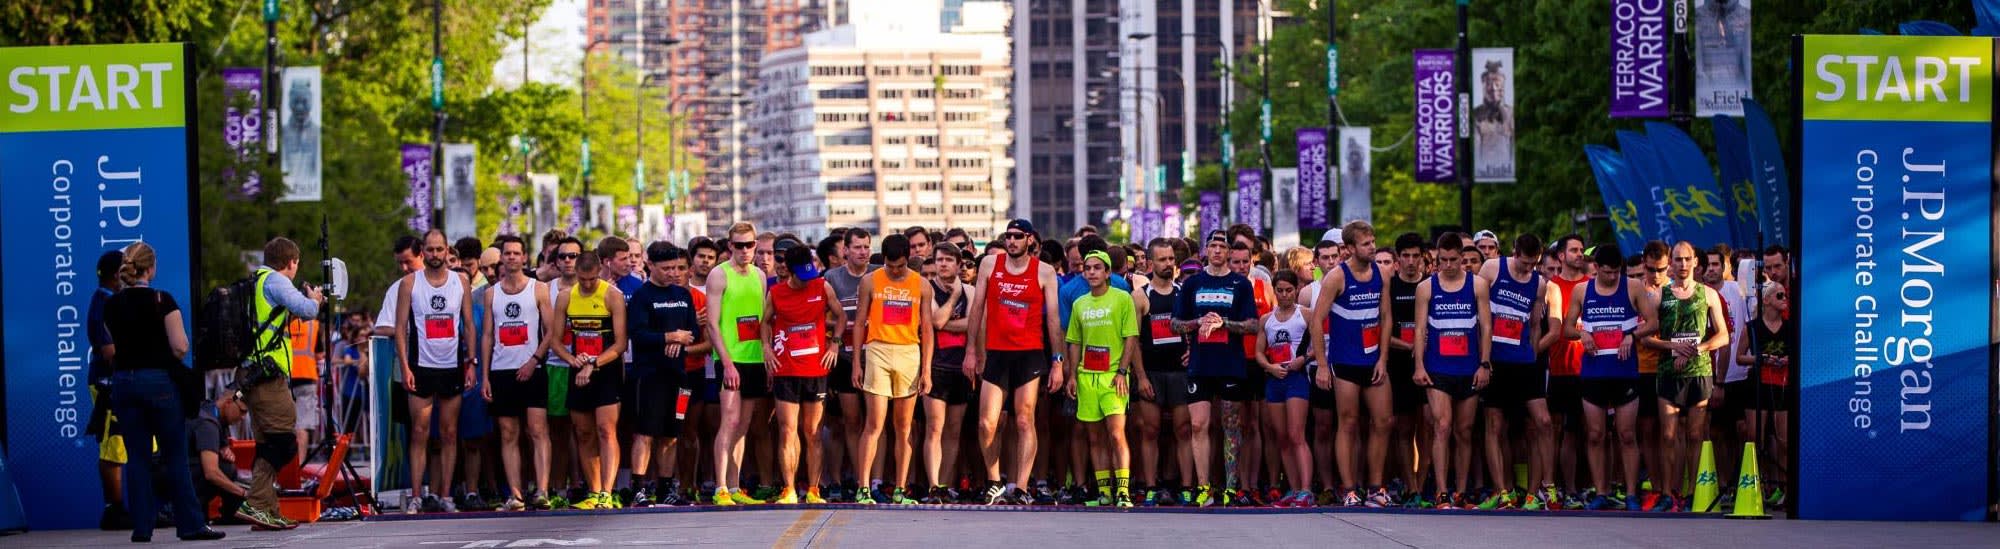 Chase Corporate Challenge Running in New York — Let’s Do This